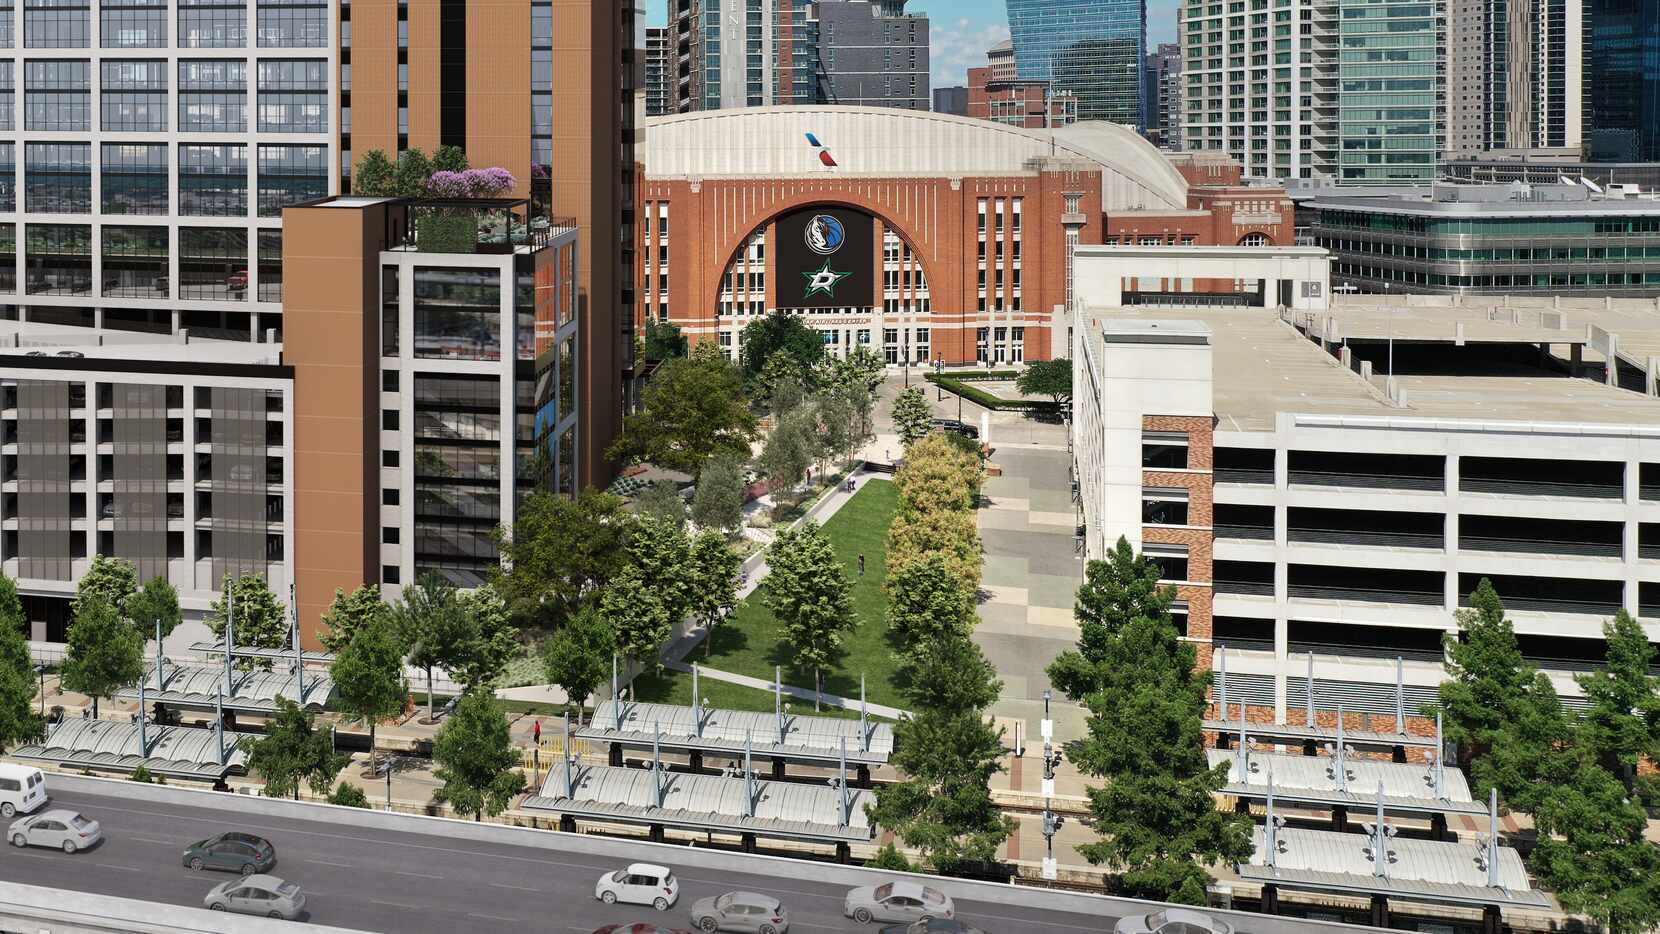 Victory Commons overlooks a new one-acre landscaped plaza in front of the American Airlines...